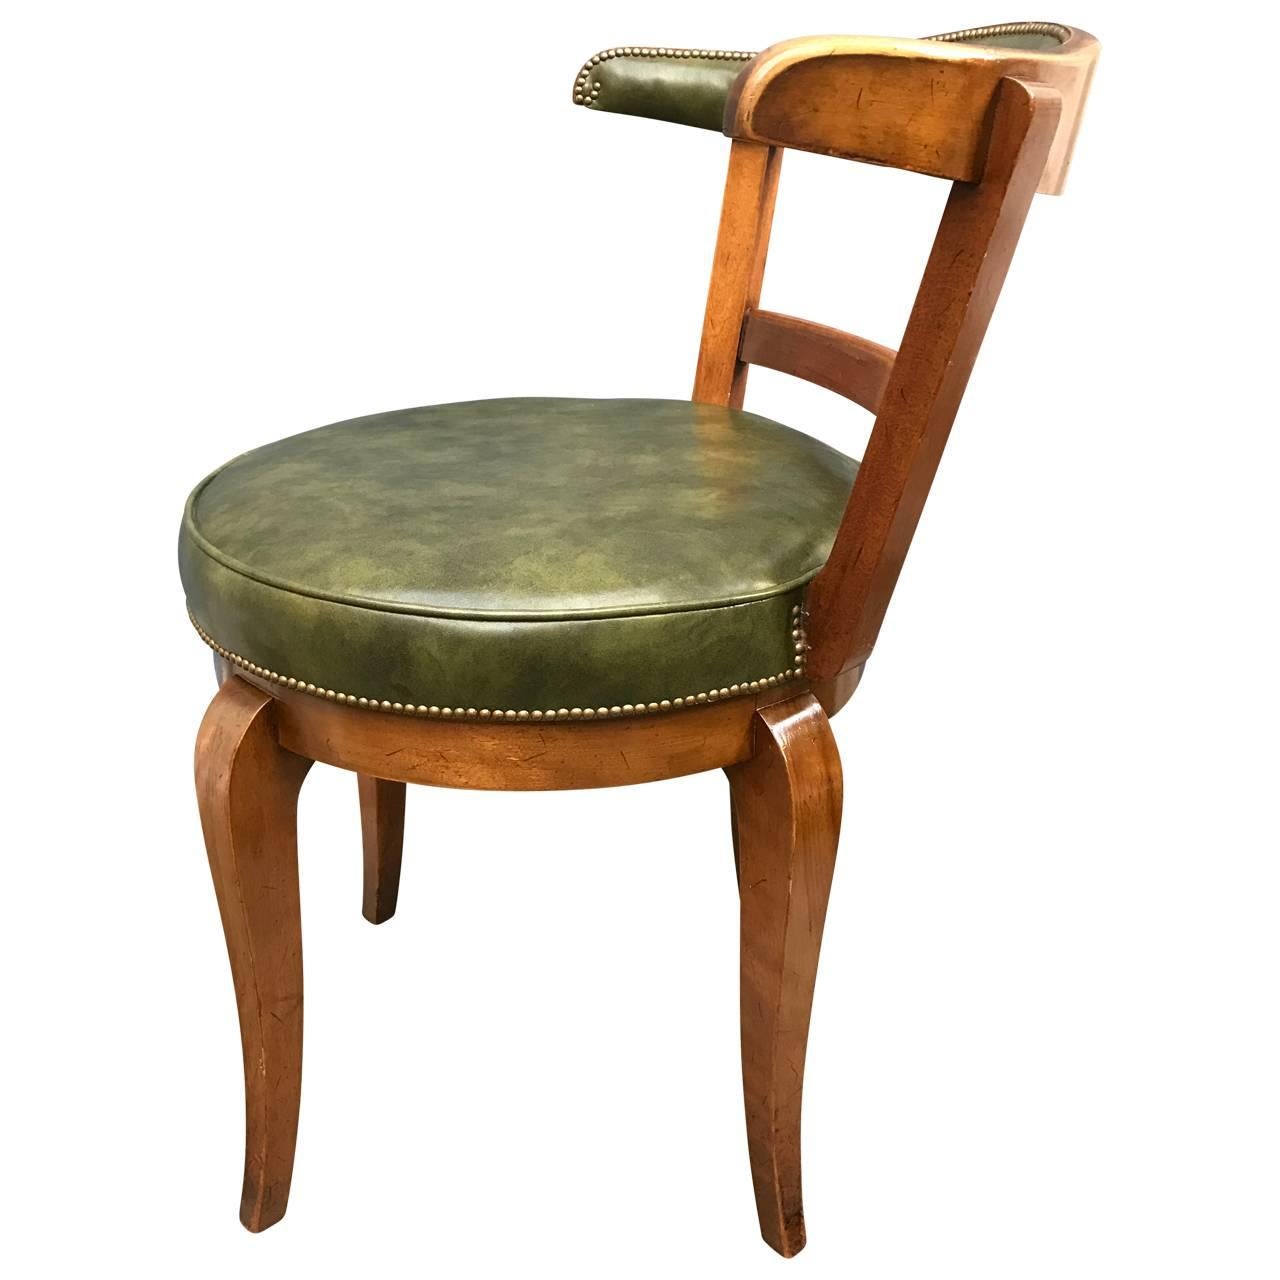 Lazy Susan horseshoe vanity chair in green leather and nail heads.